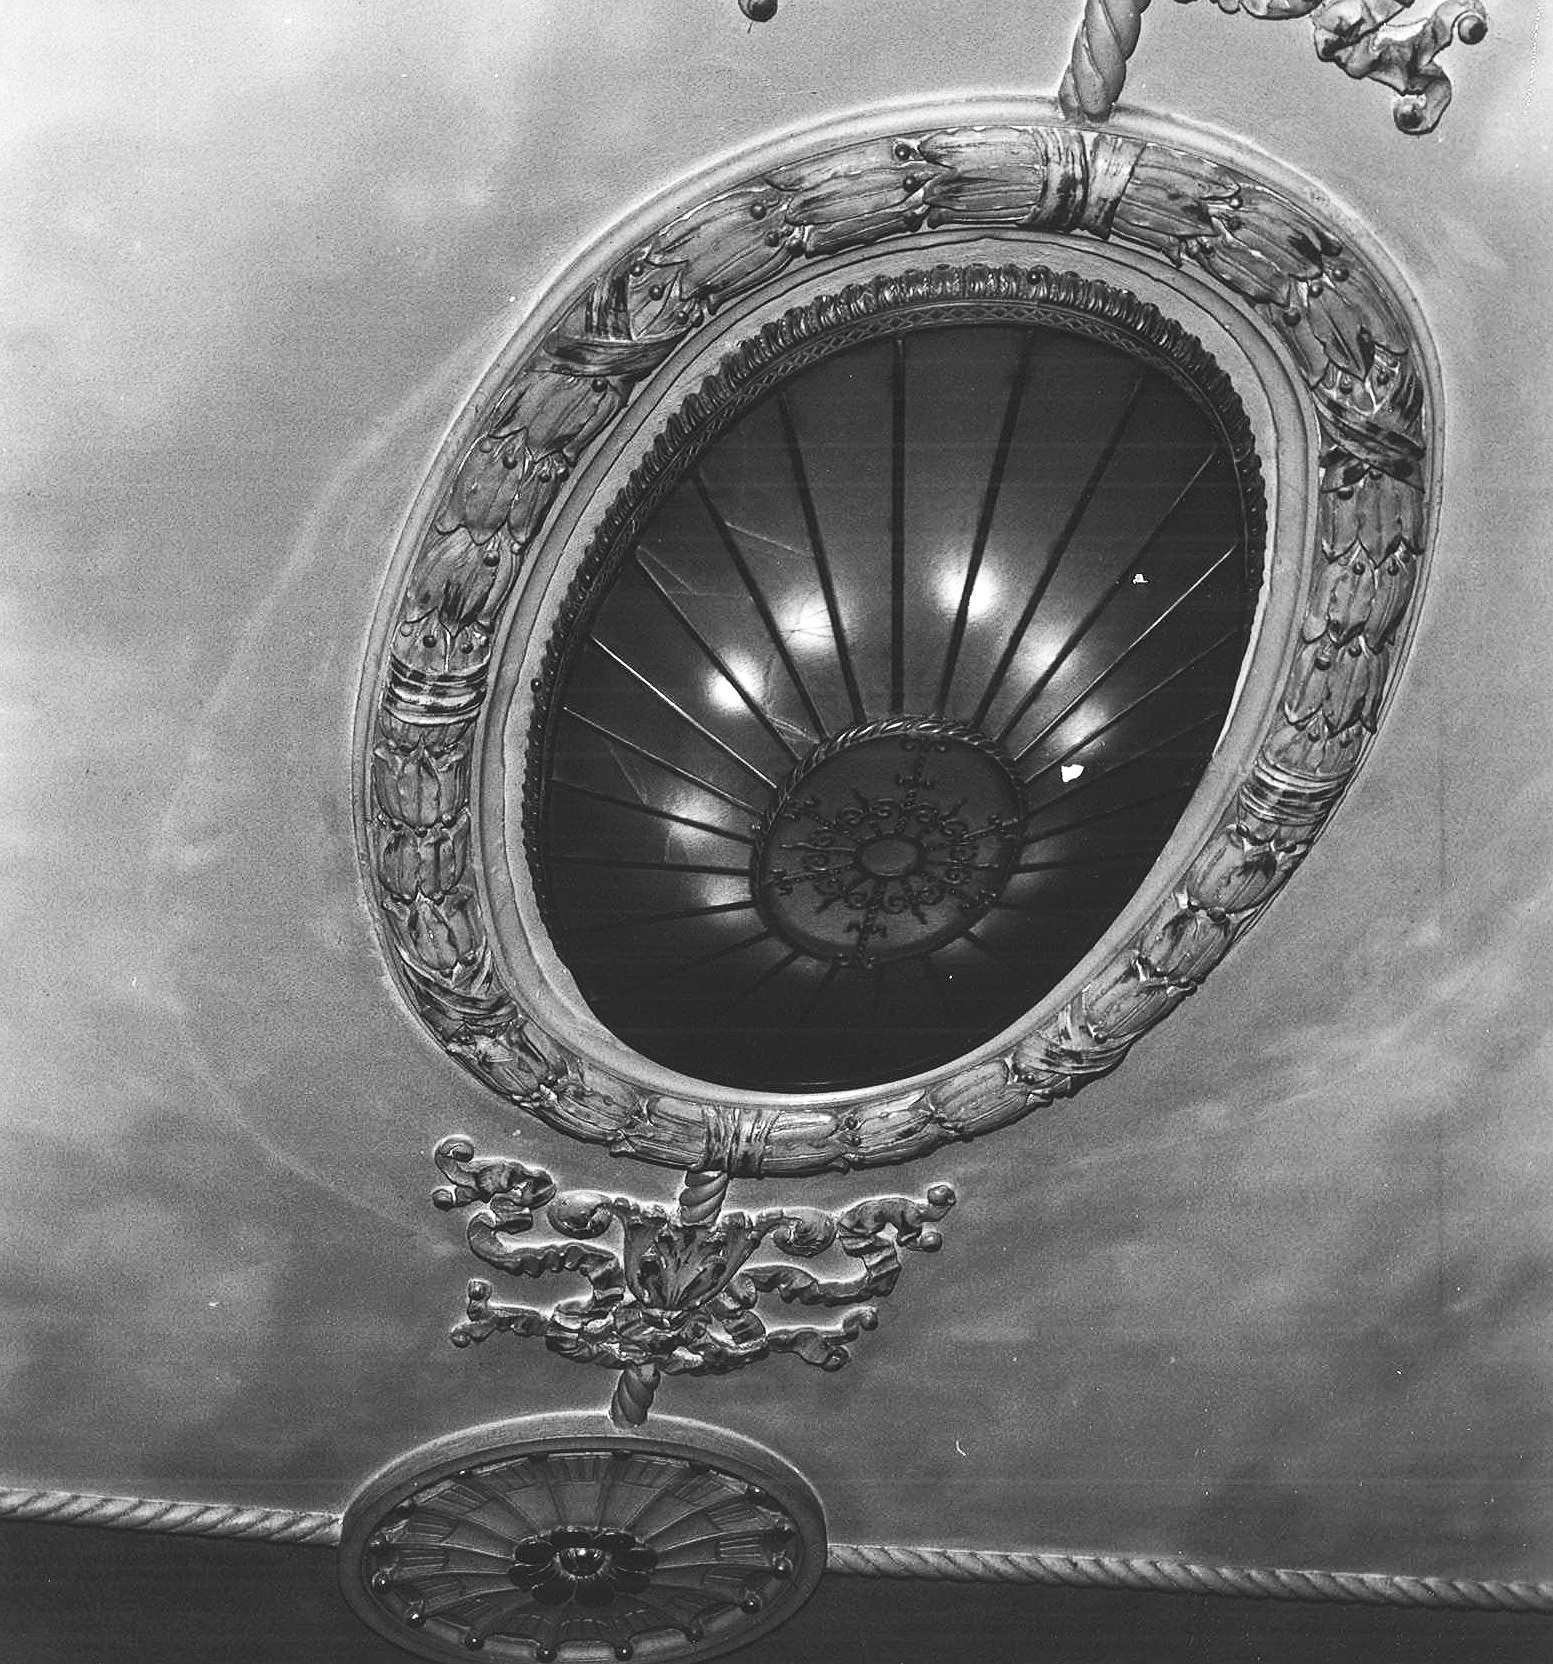 UNDER BALCONY CEILING DETAIL (Date Unknown)